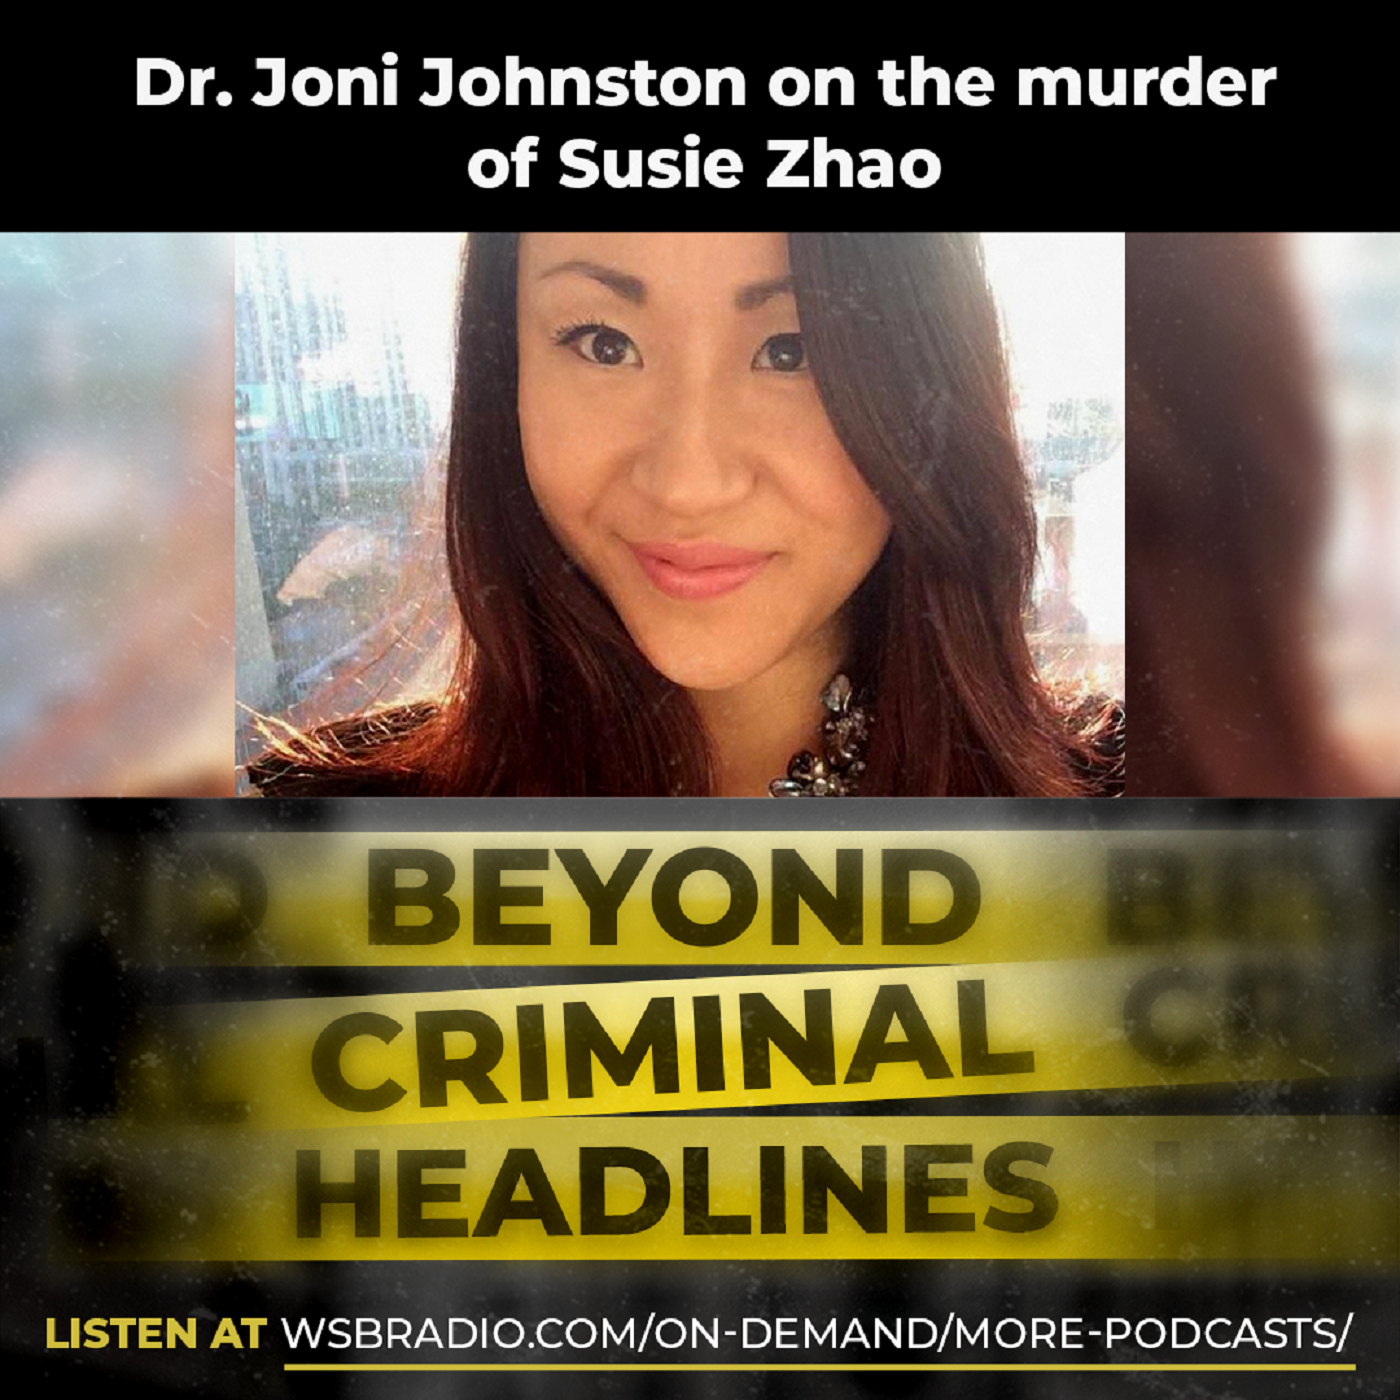 Dr. Joni Johnston on the murder of Susie Zhao